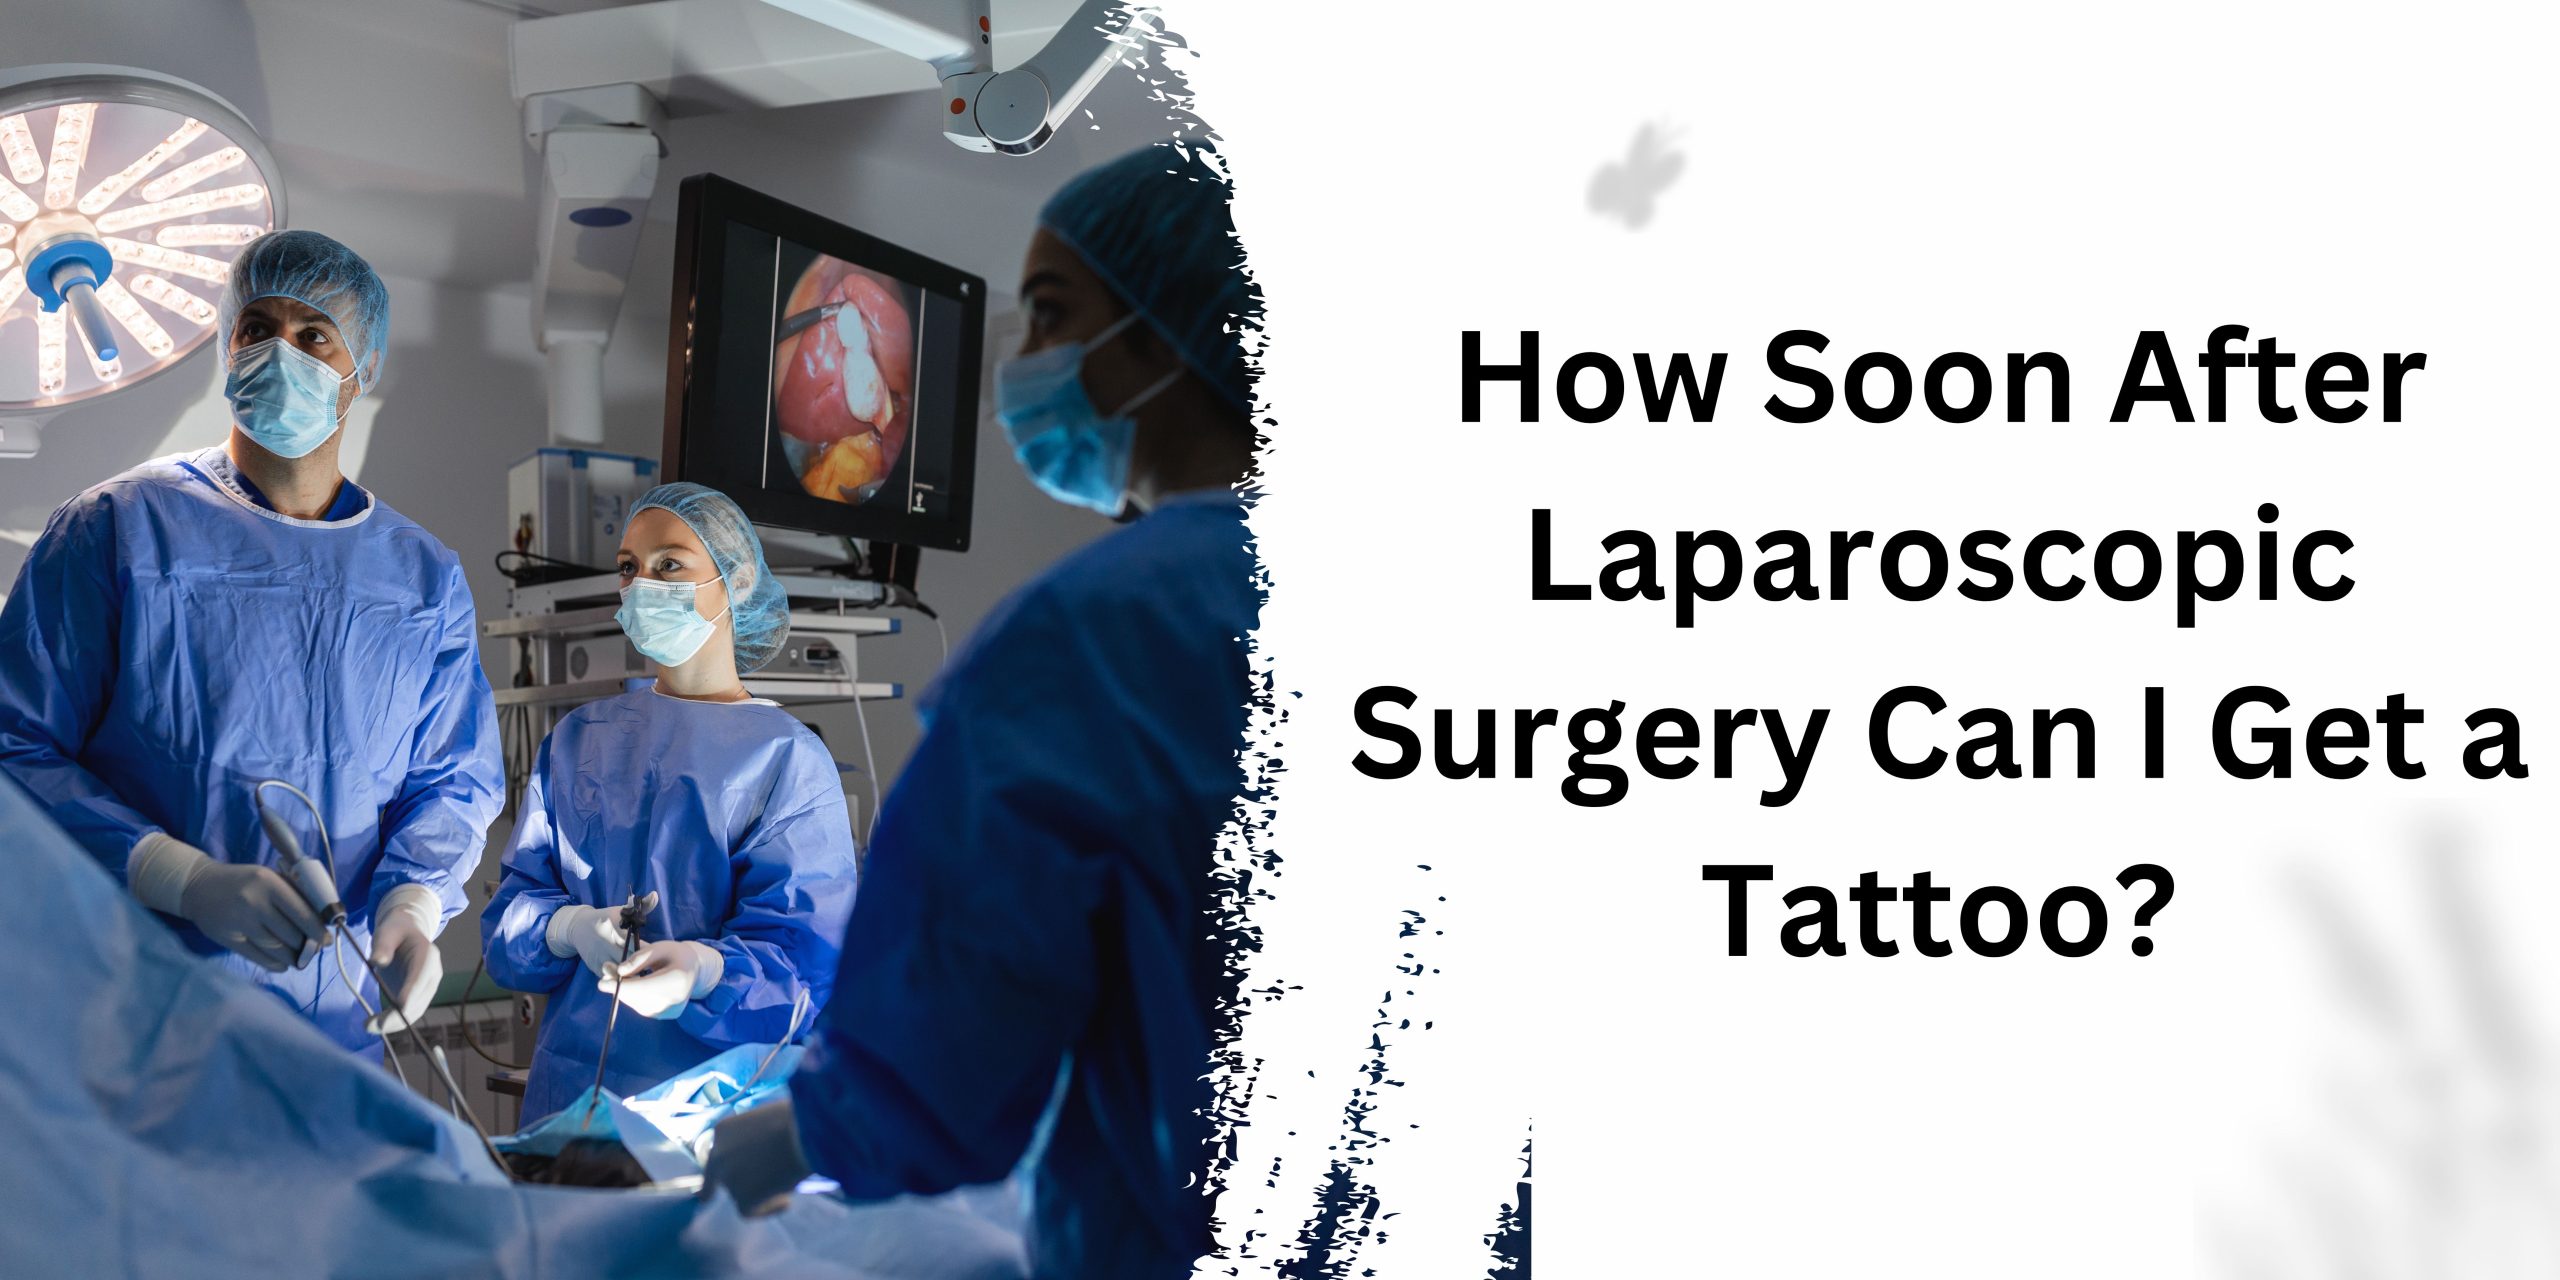 How Soon After Laparoscopic Surgery Can I Get a Tattoo